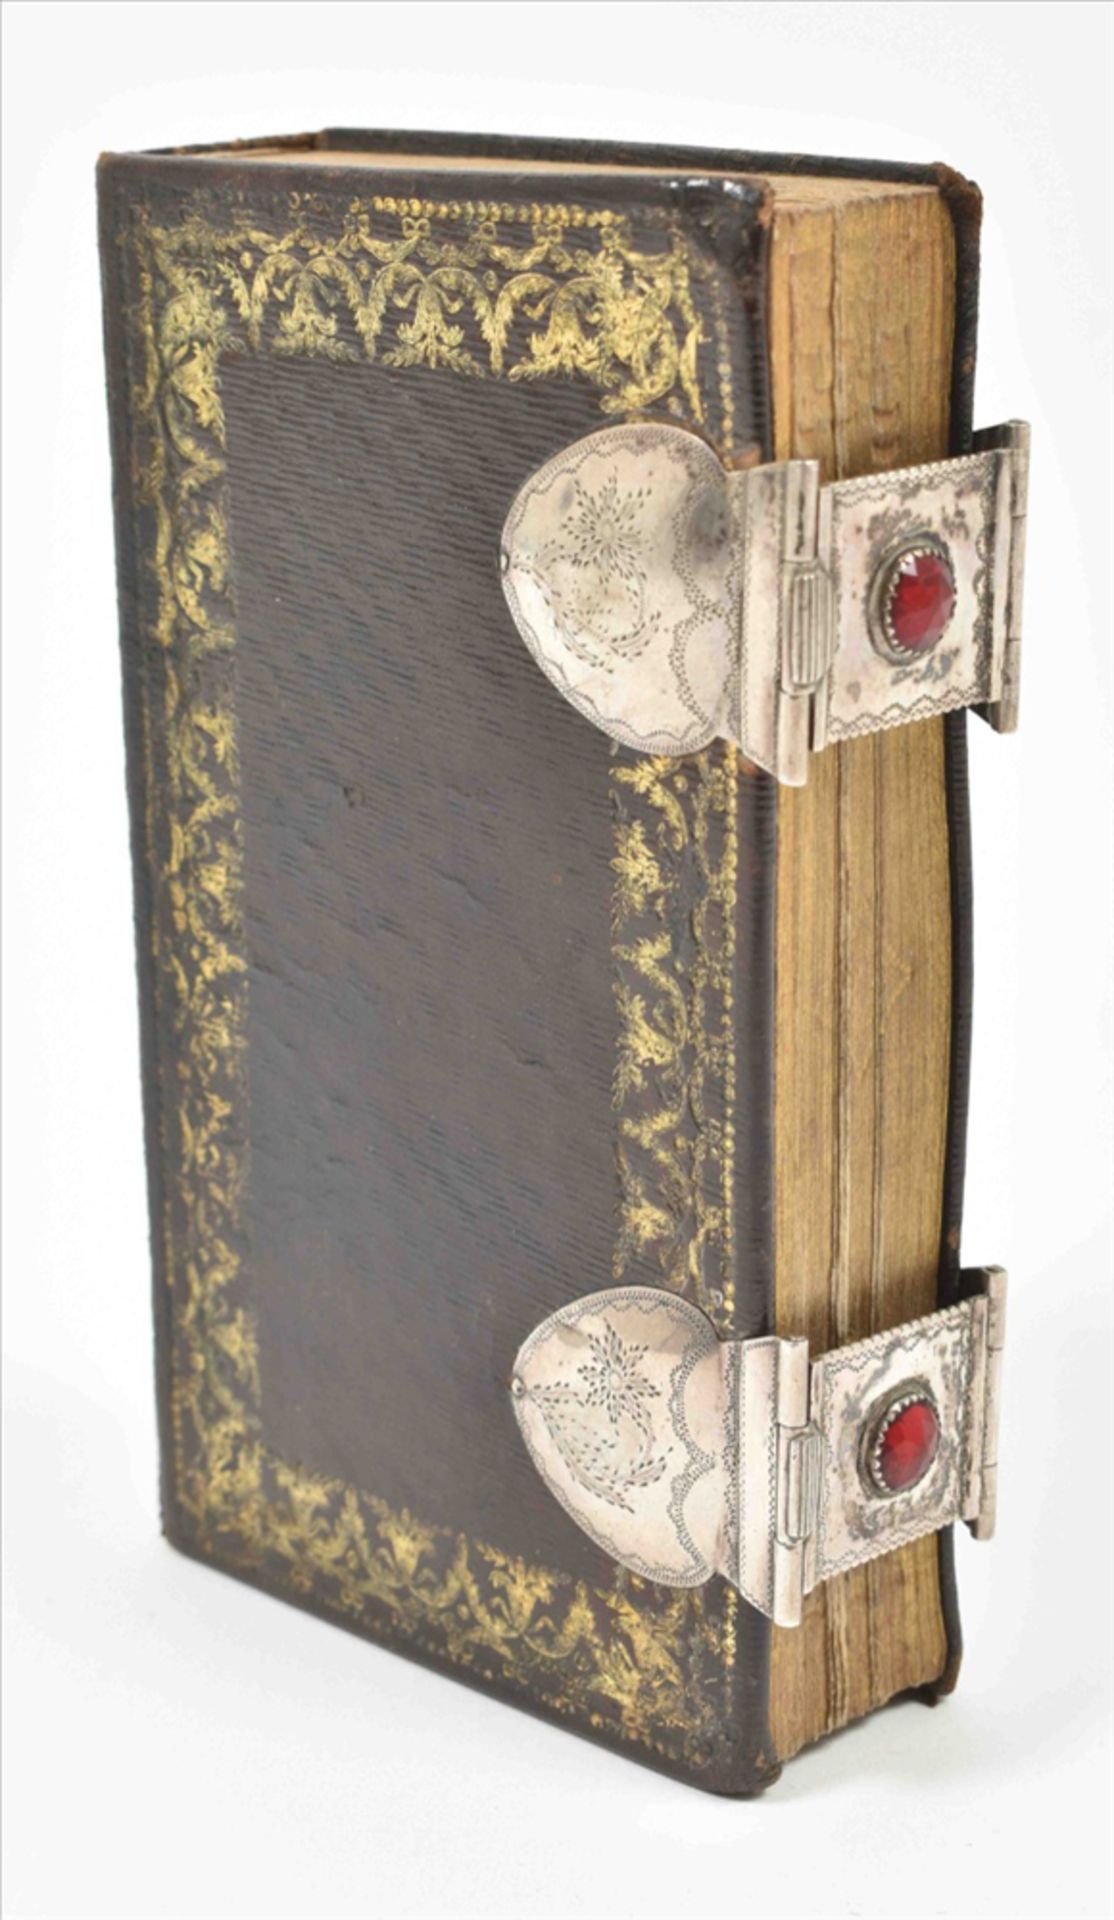 [Bindings] Early 19th century brown leather binding with two silver clasps and catches